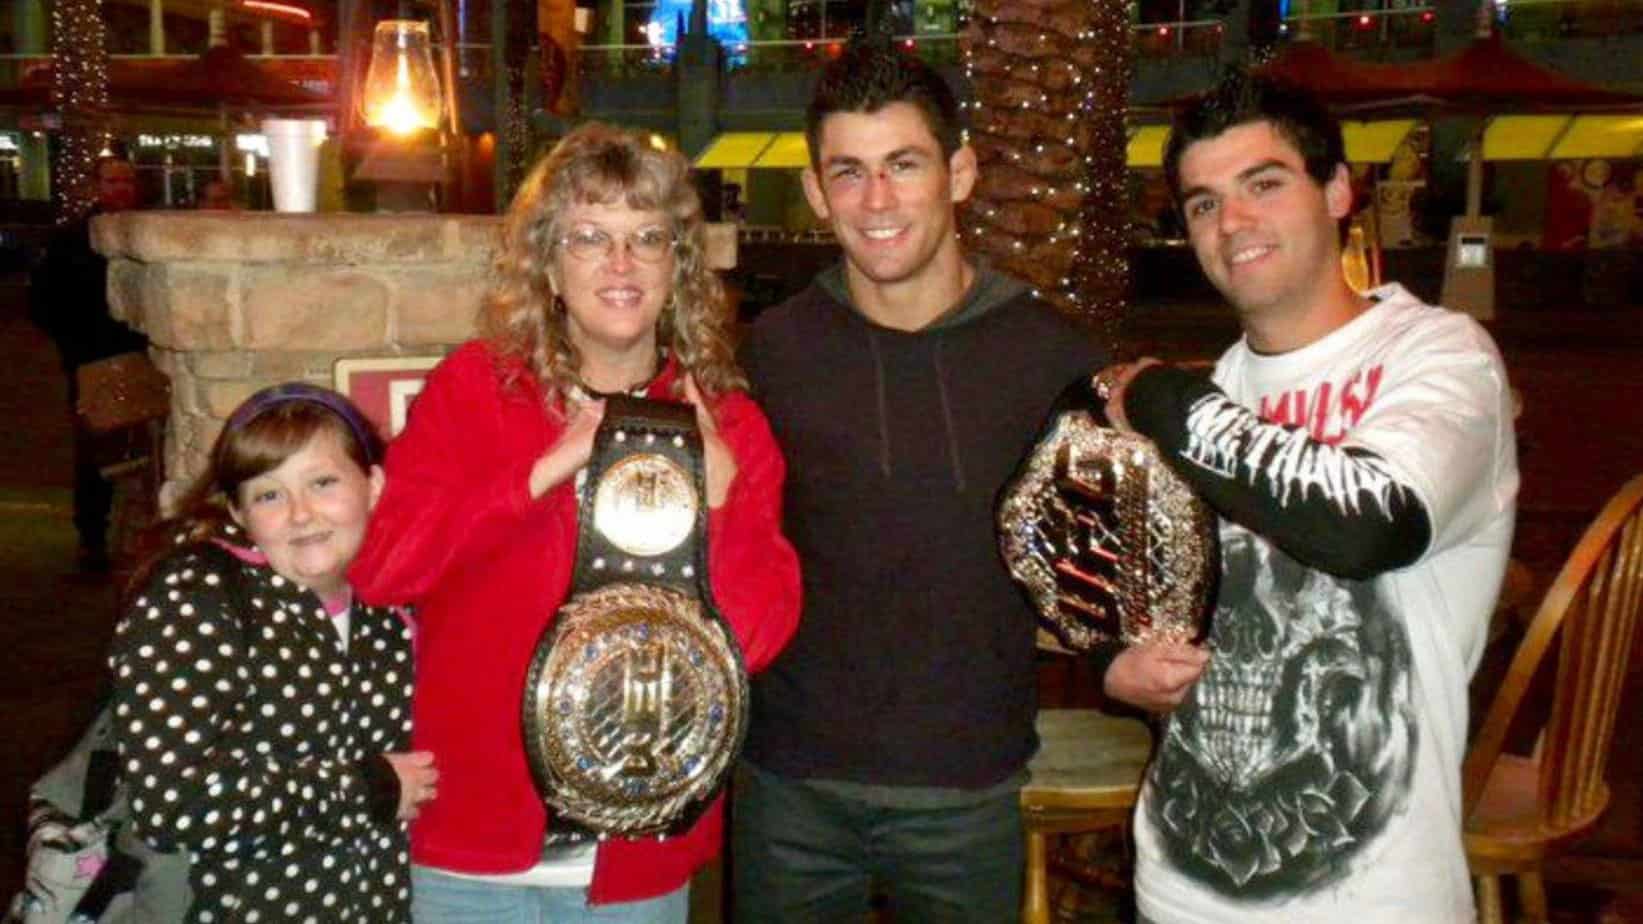 https://www.sportsmanor.com/news-everything-you-need-to-know-about-dominick-cruz-and-his-family-girlfriend-mother-and-more/